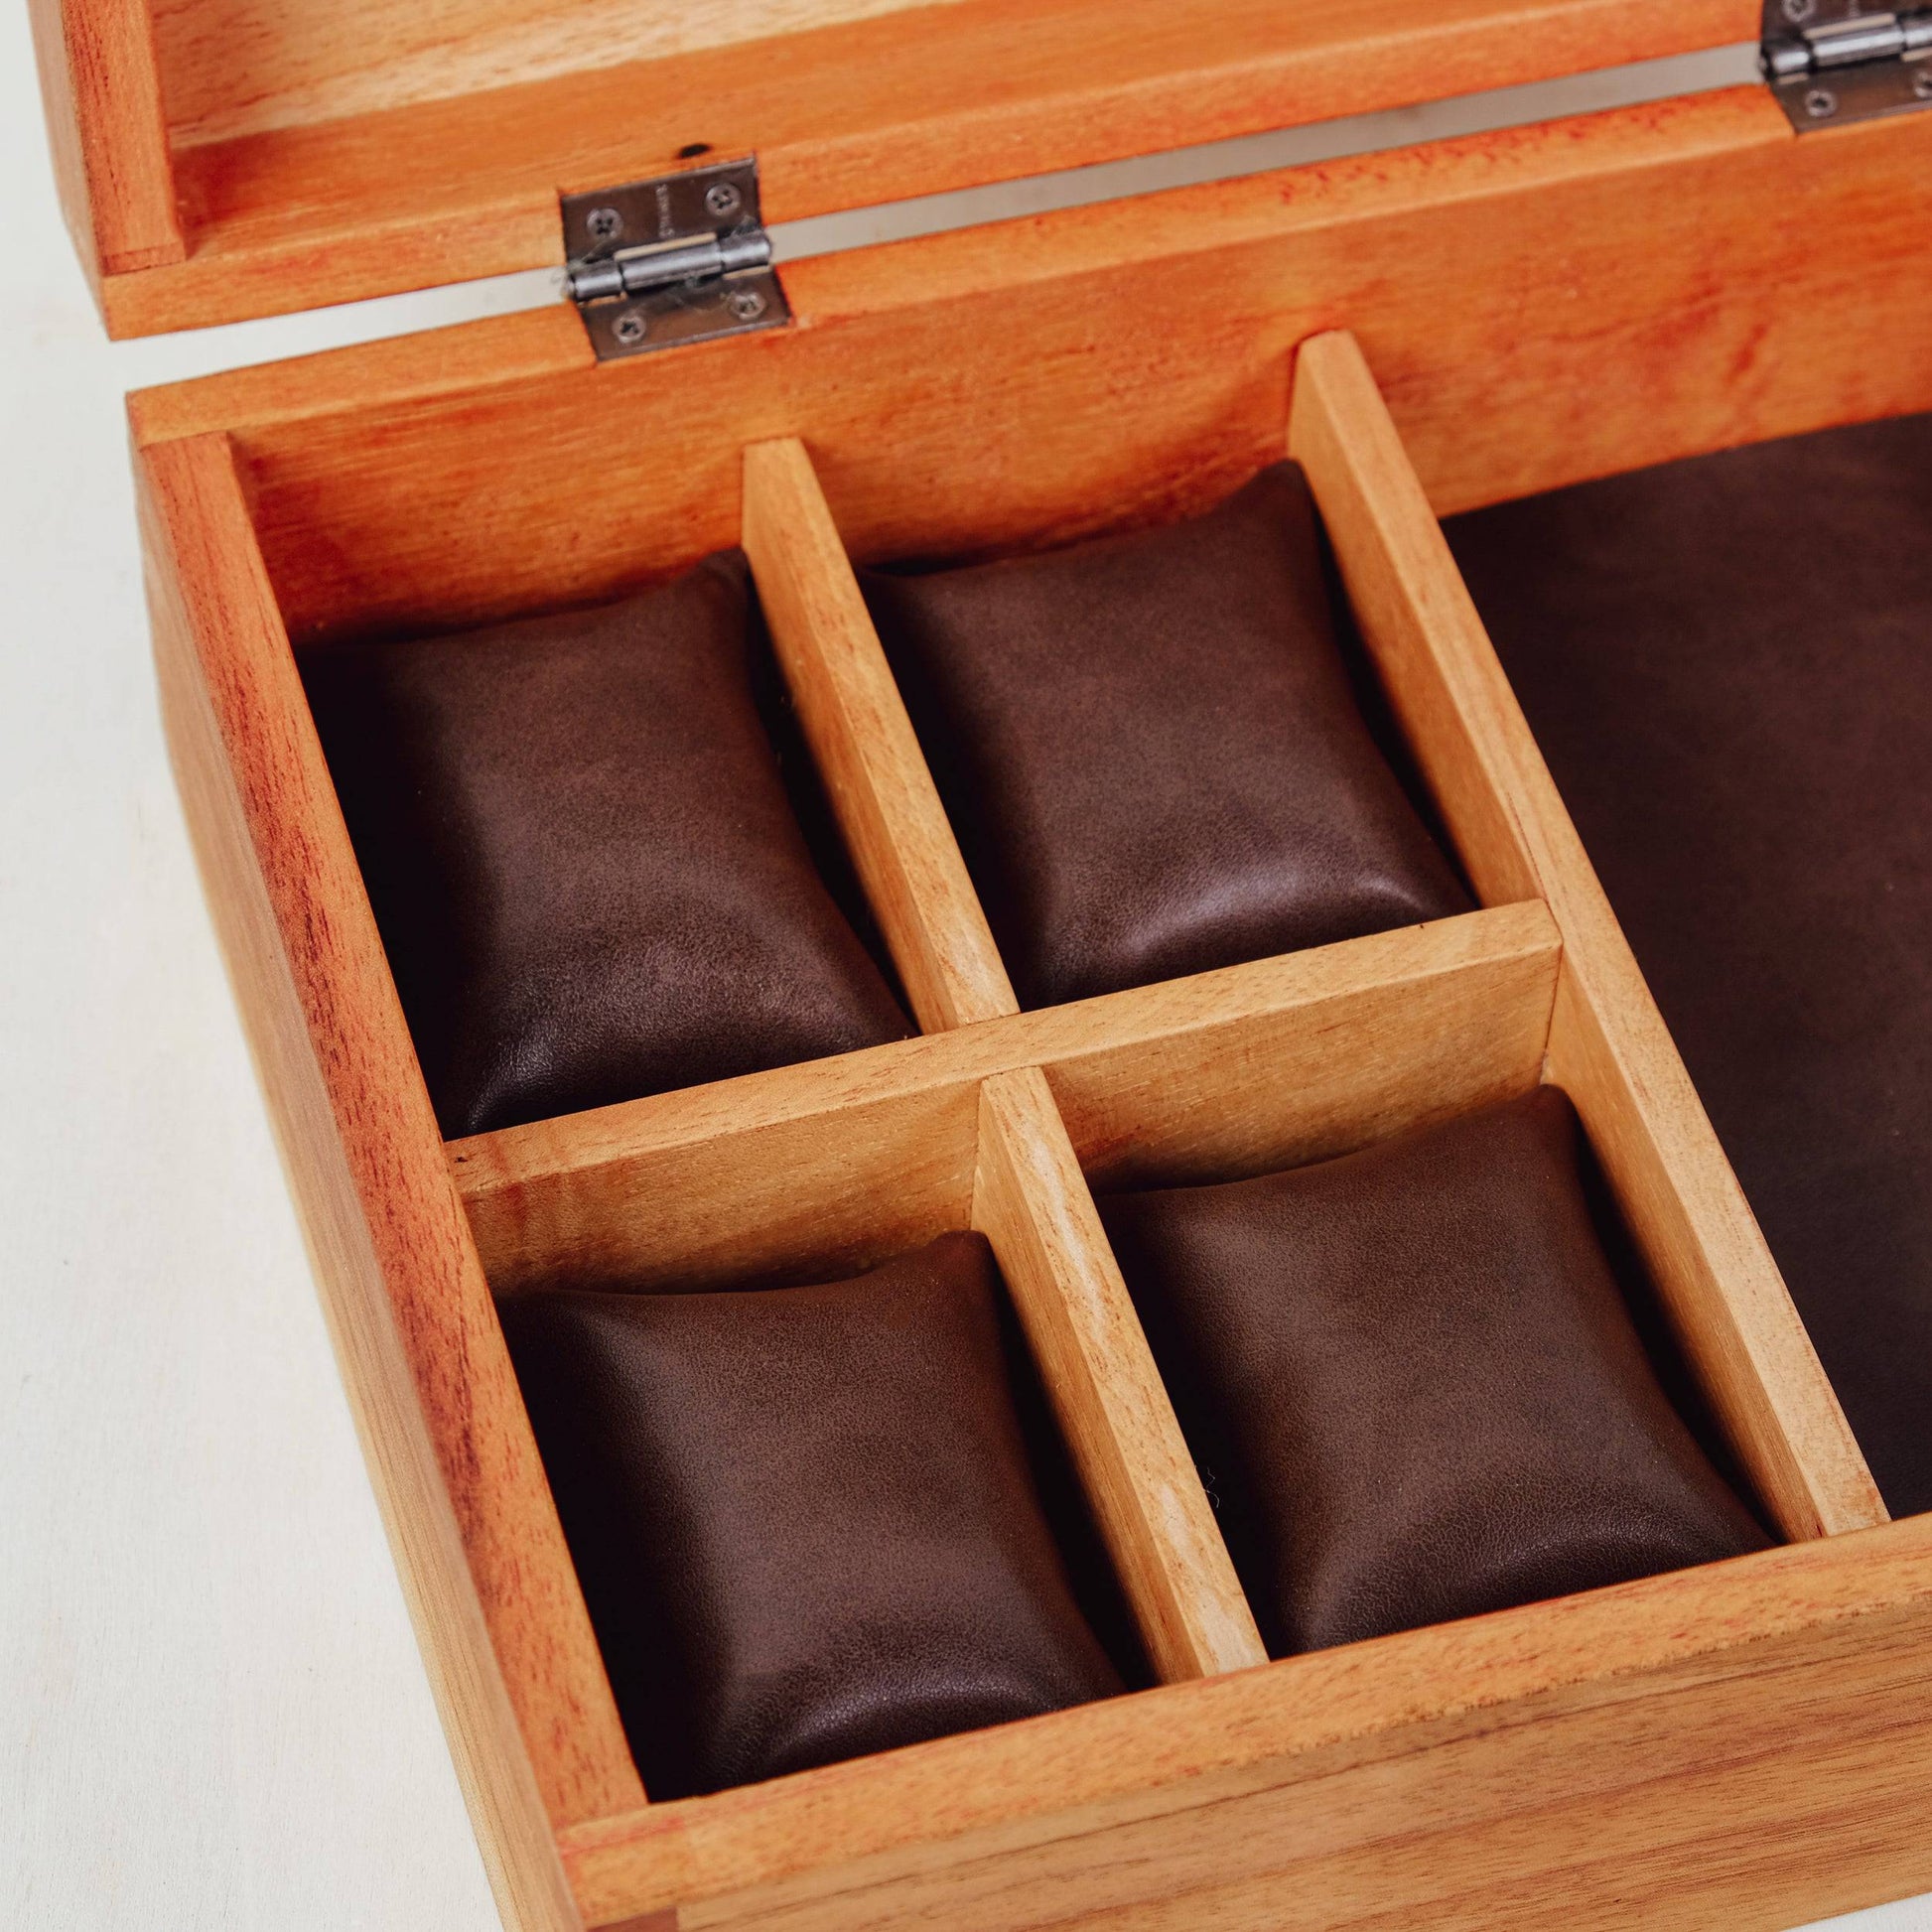 Men's Watch Box Storage Box for 8 Watches with Drawer